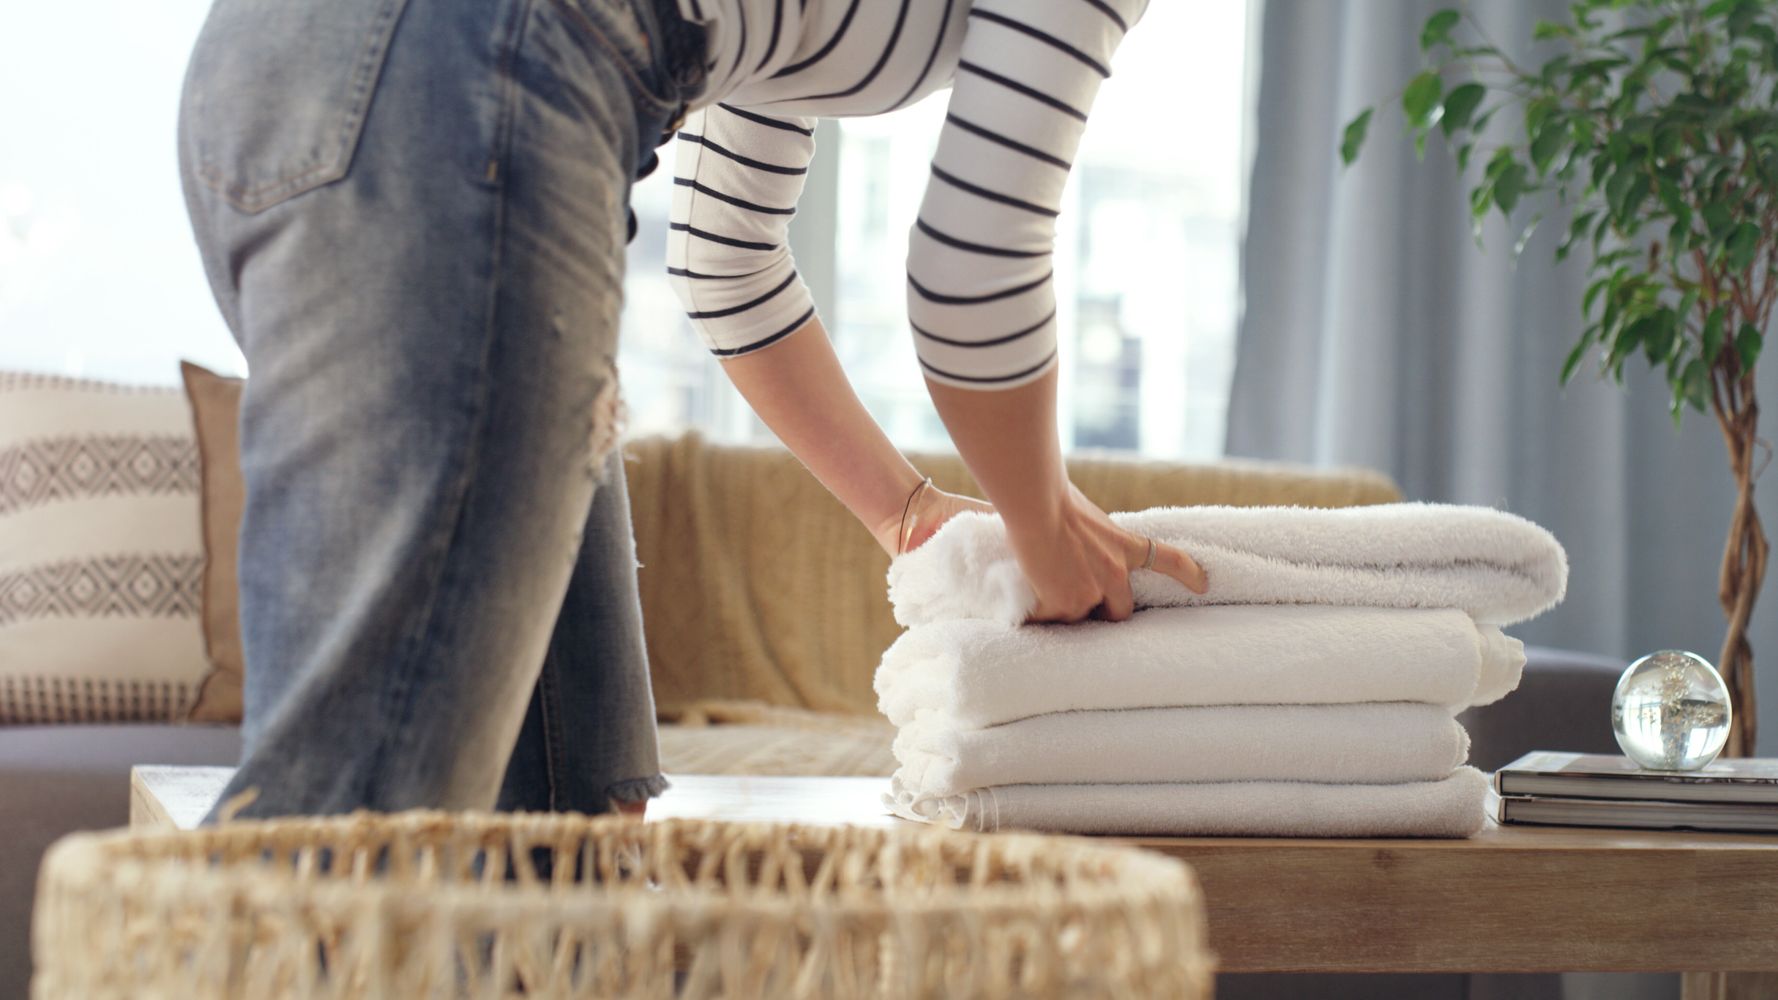 Are Your Bath Towels Really Clean After Washing?